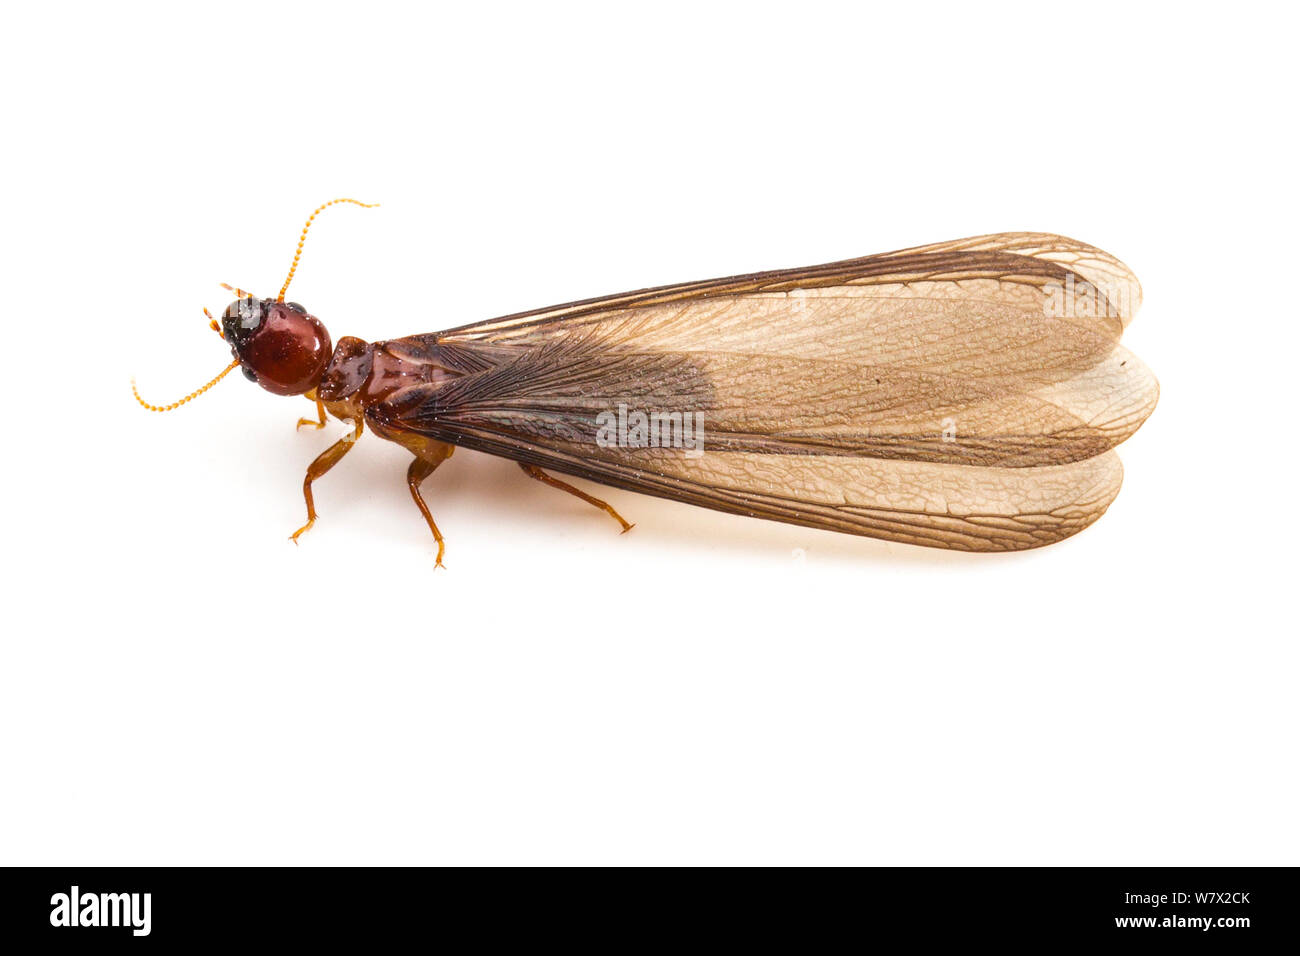 Pacific coast dampwood termite (Zootermopsis angusticollis) alate, on white background, Rivernook Campground, Kernville, Kern County, California, USA, June. Stock Photo